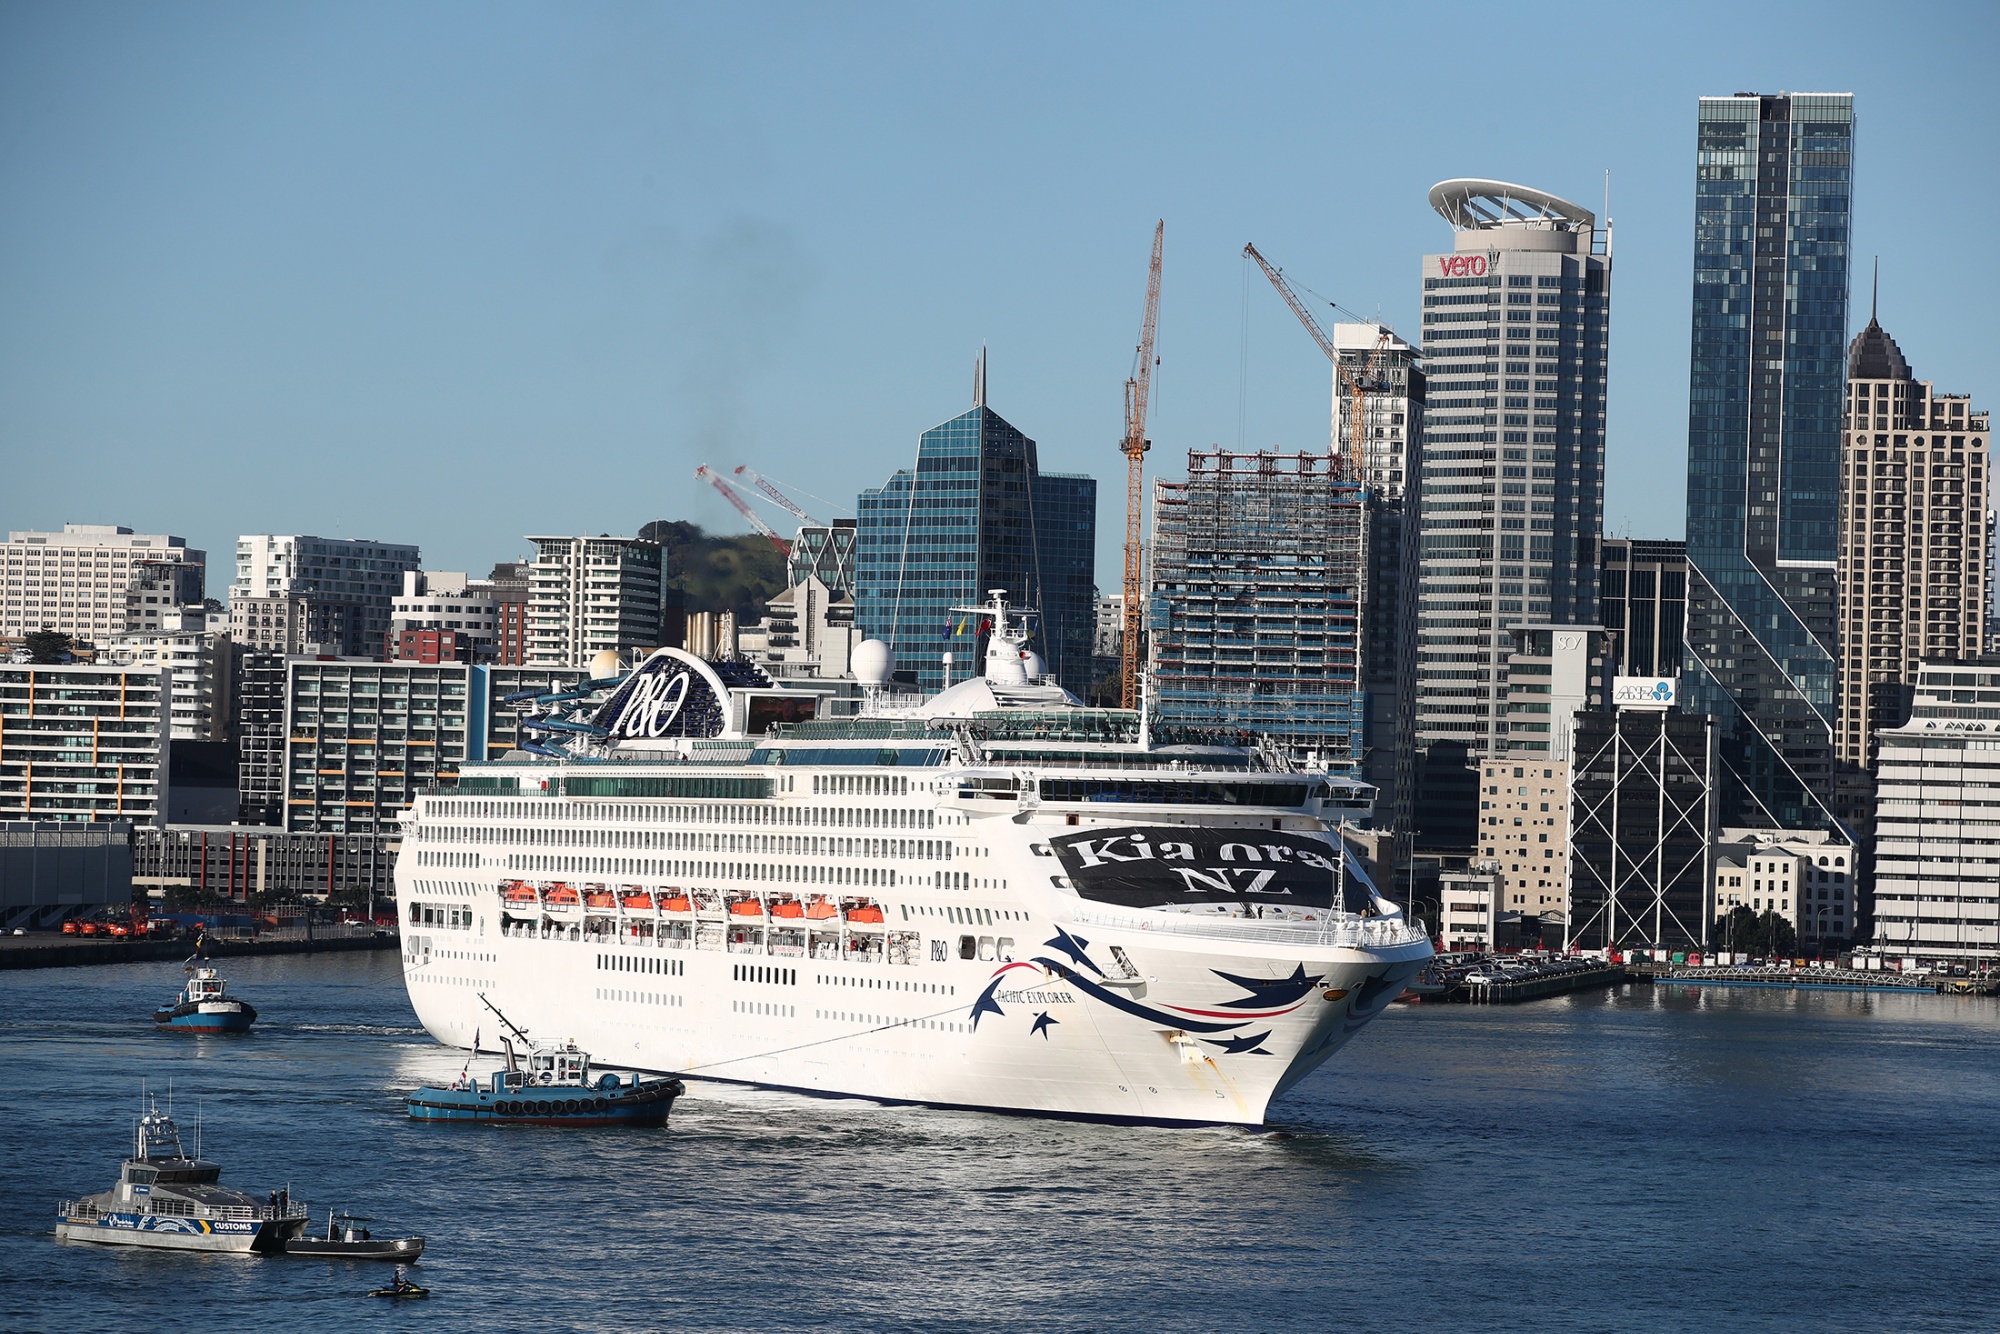 cruise ship departing auckland today